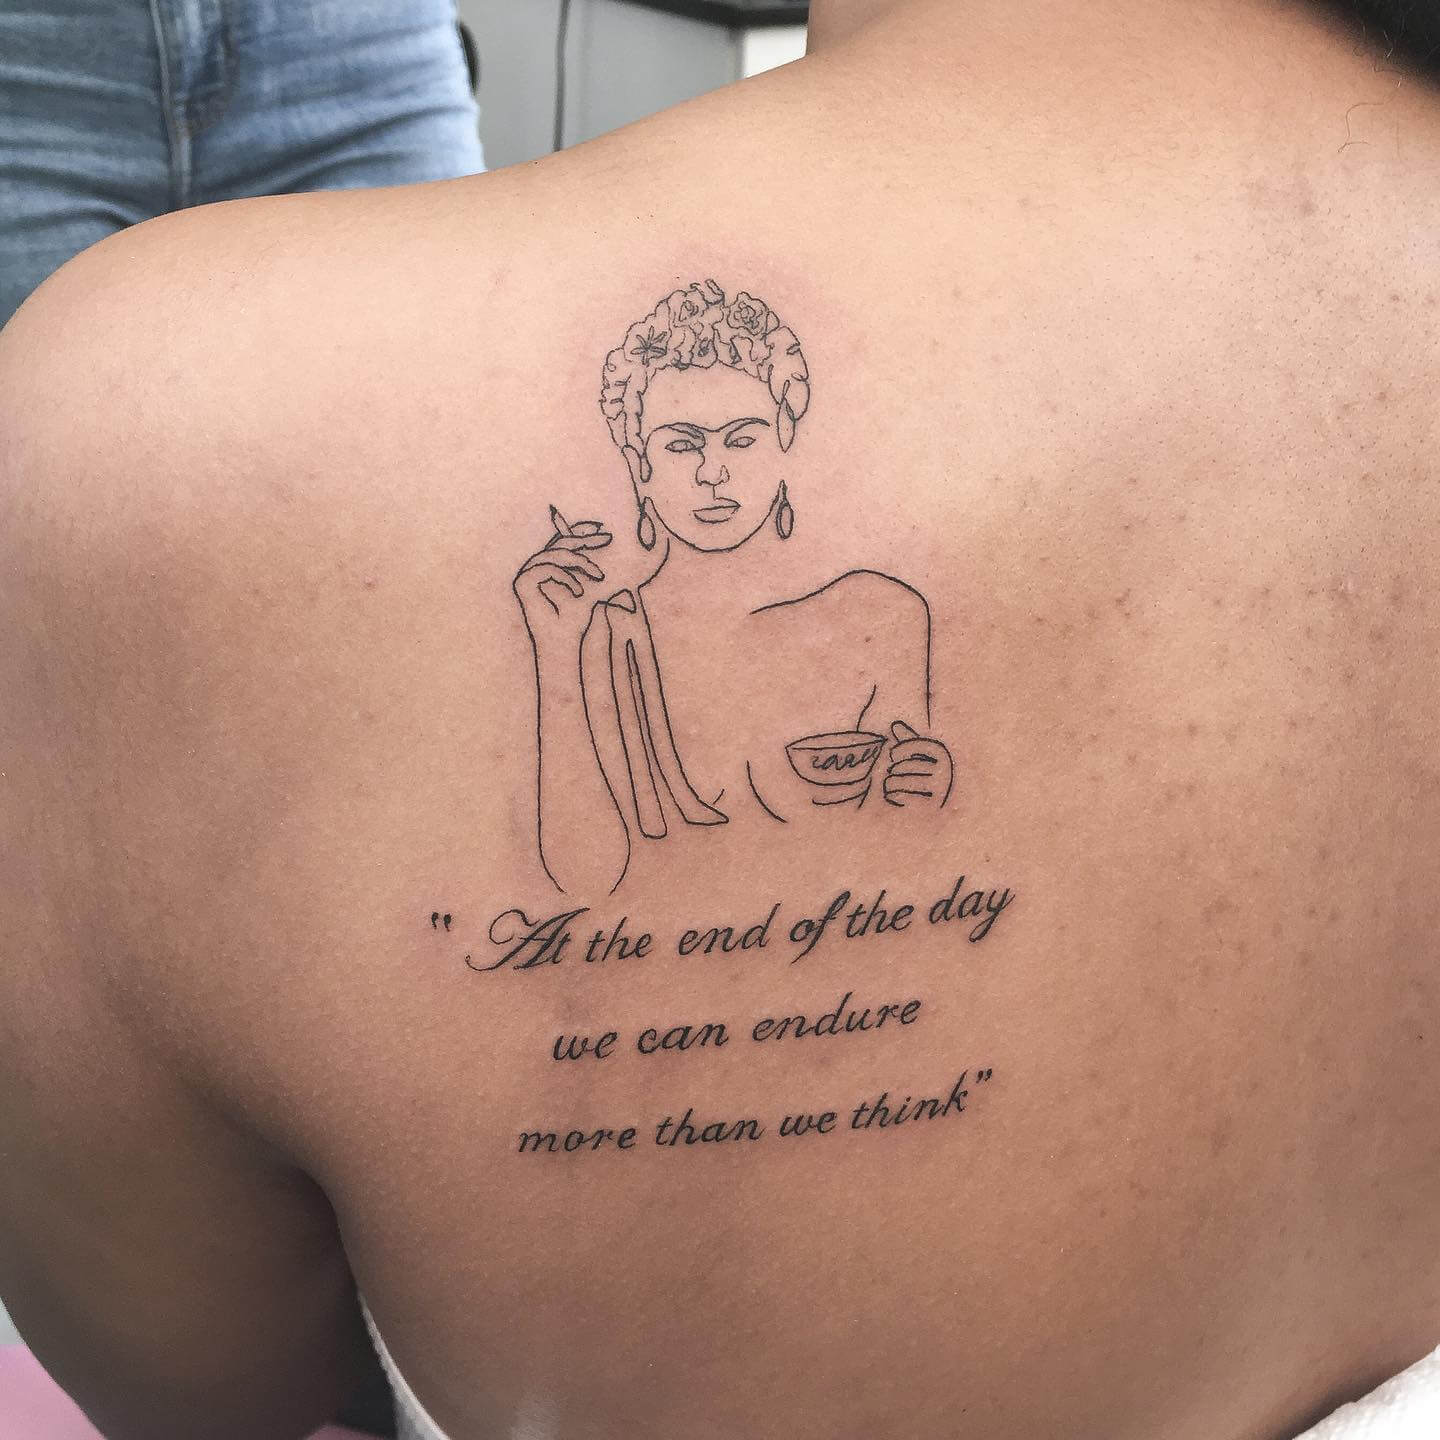 Frida Kahlo Tattoo Quotes 12 1 80+ Famous Frida Kahlo Tattoo Designs (Inspirational, Meaningful And Meaningless)